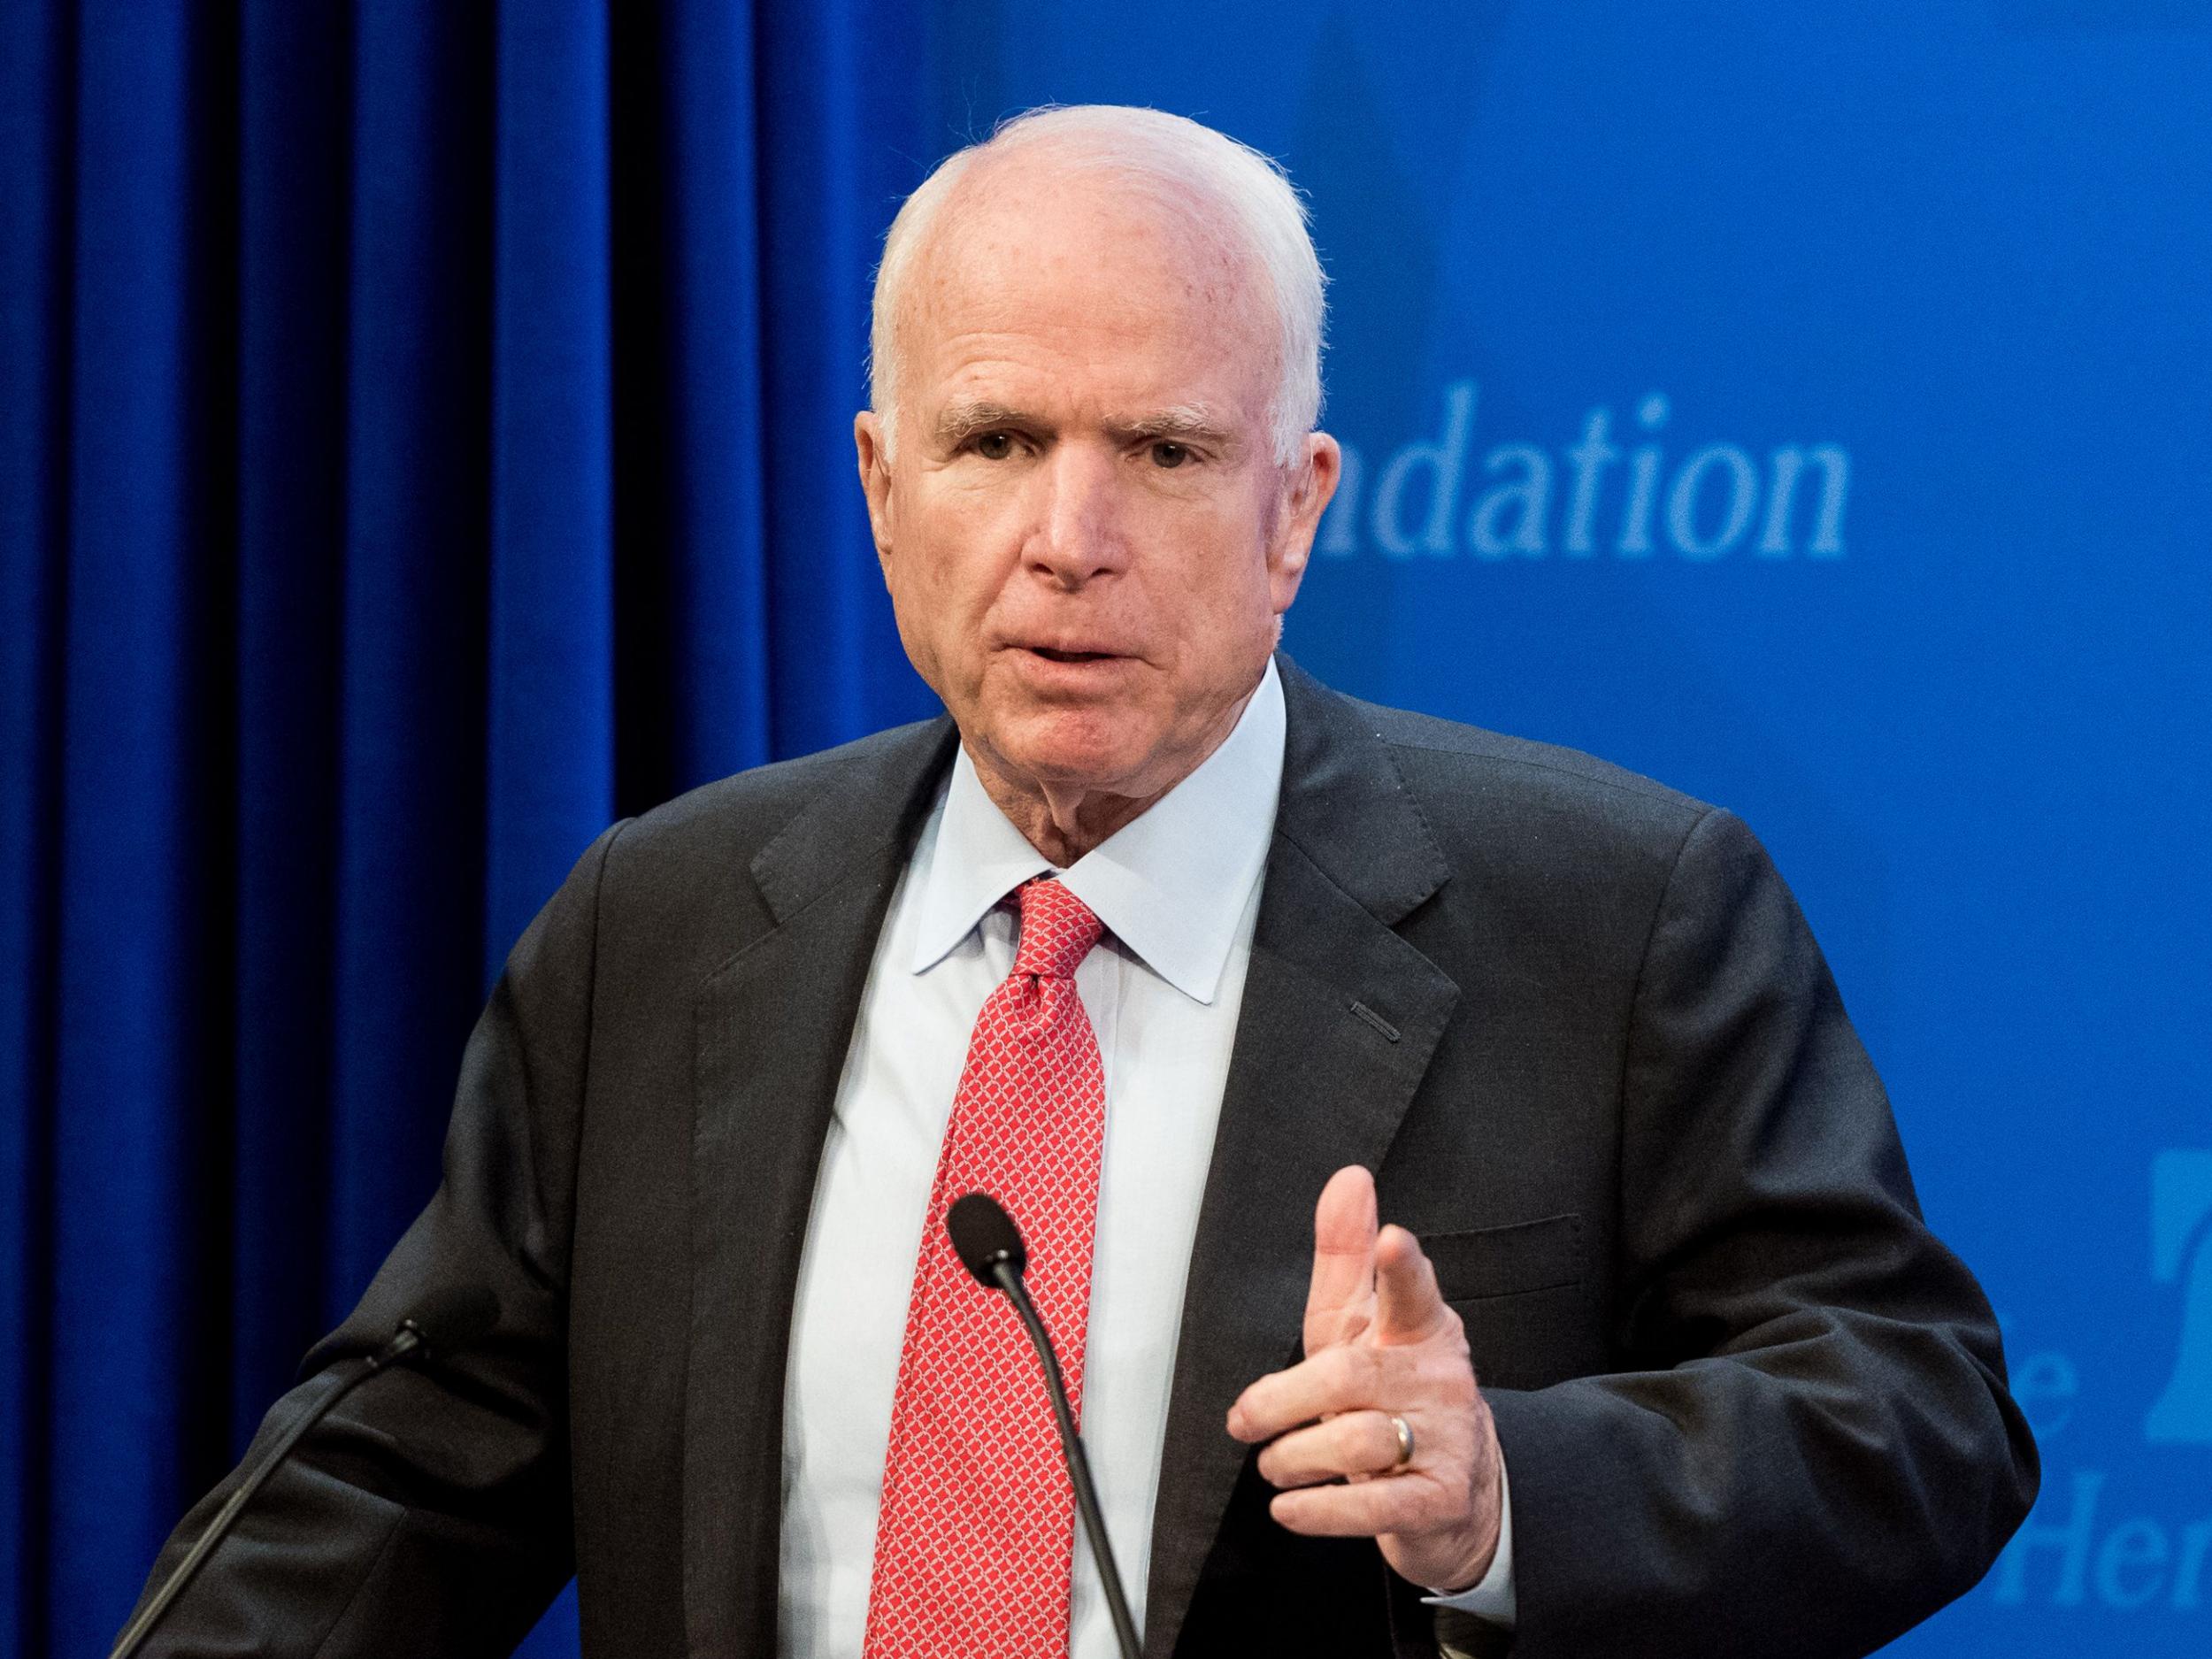 John McCain voted against repealing Obamacare